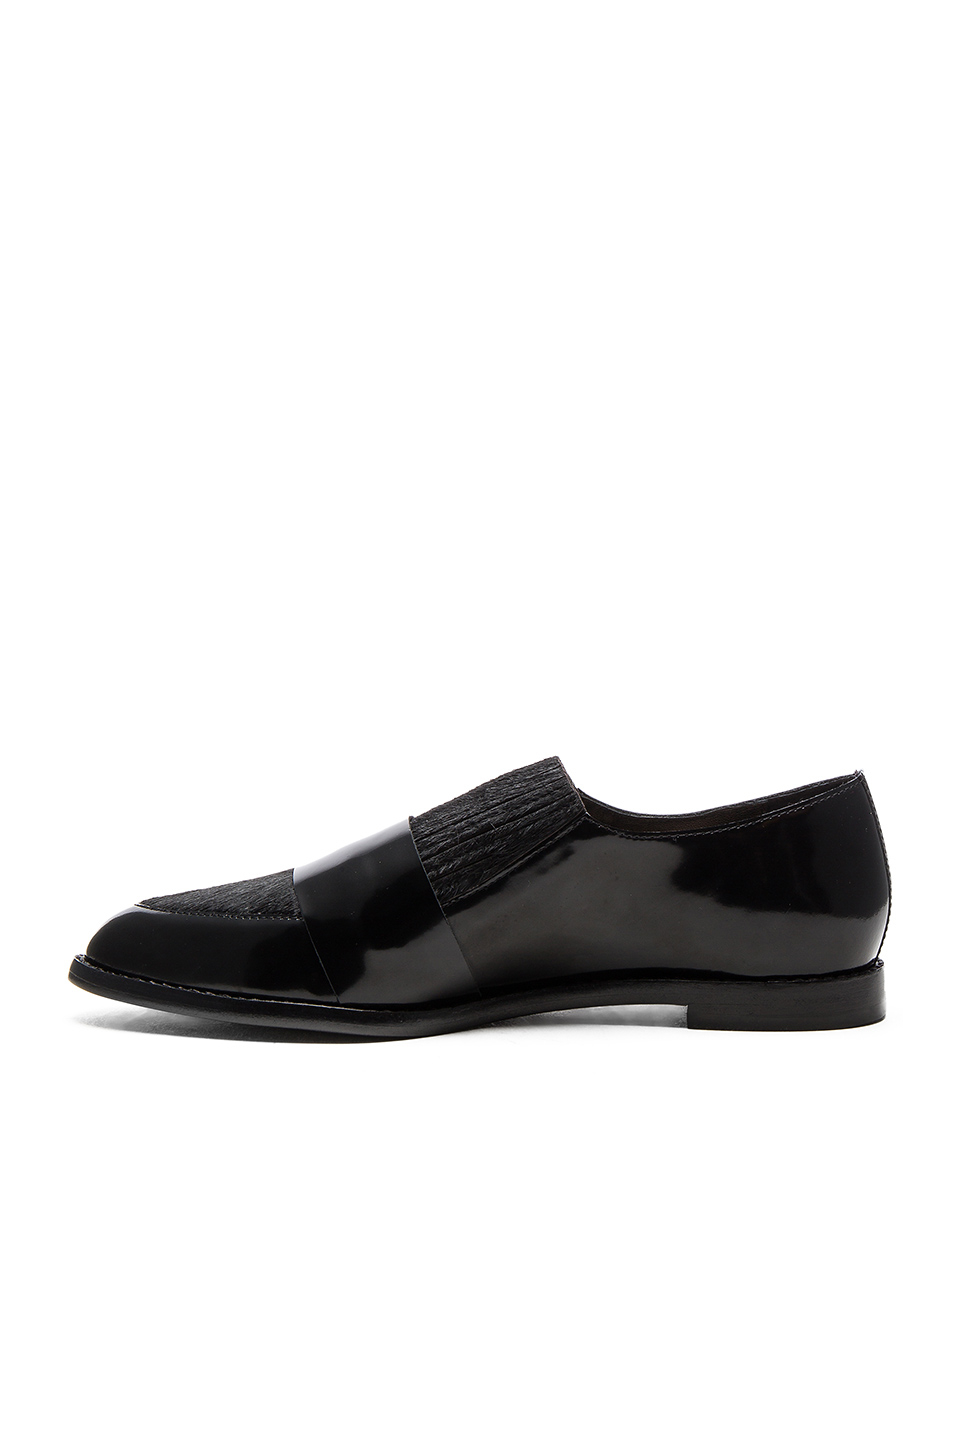 Lyst - Loeffler randall Rosa Patent Leather & Calf Hair Loafers in Black